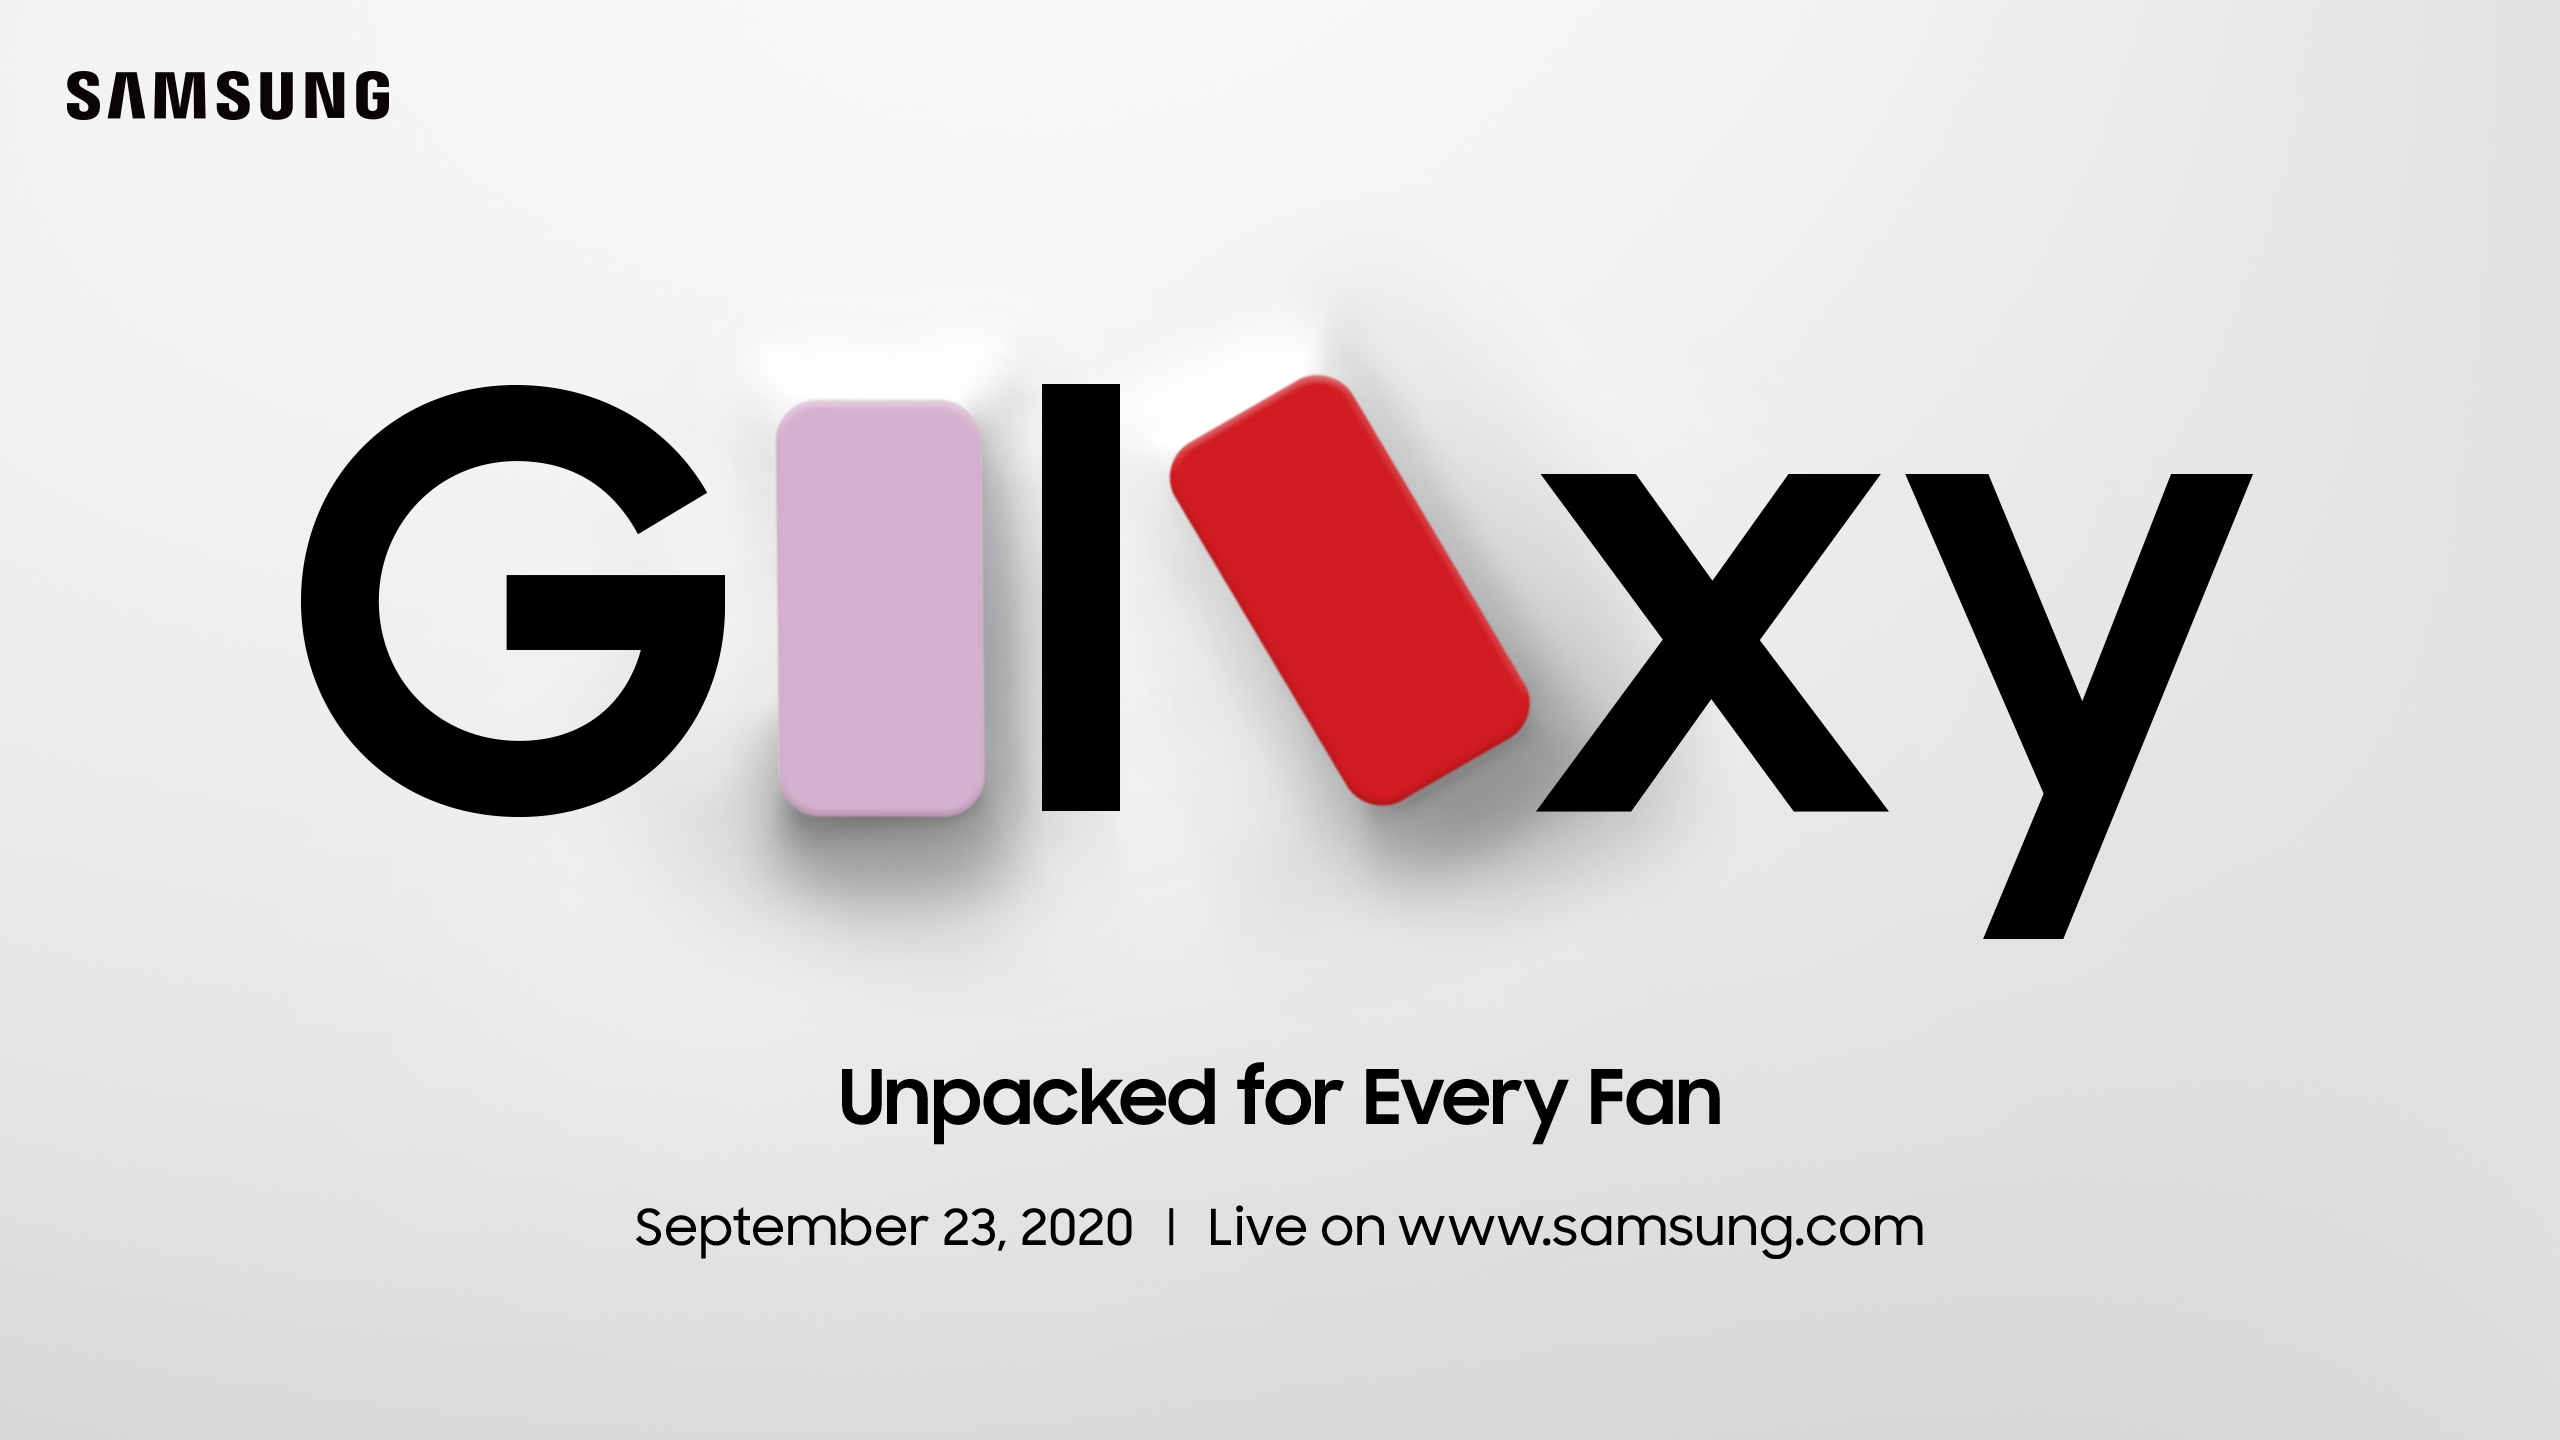 Galaxy unpacked for everyone invitation with lavender and red